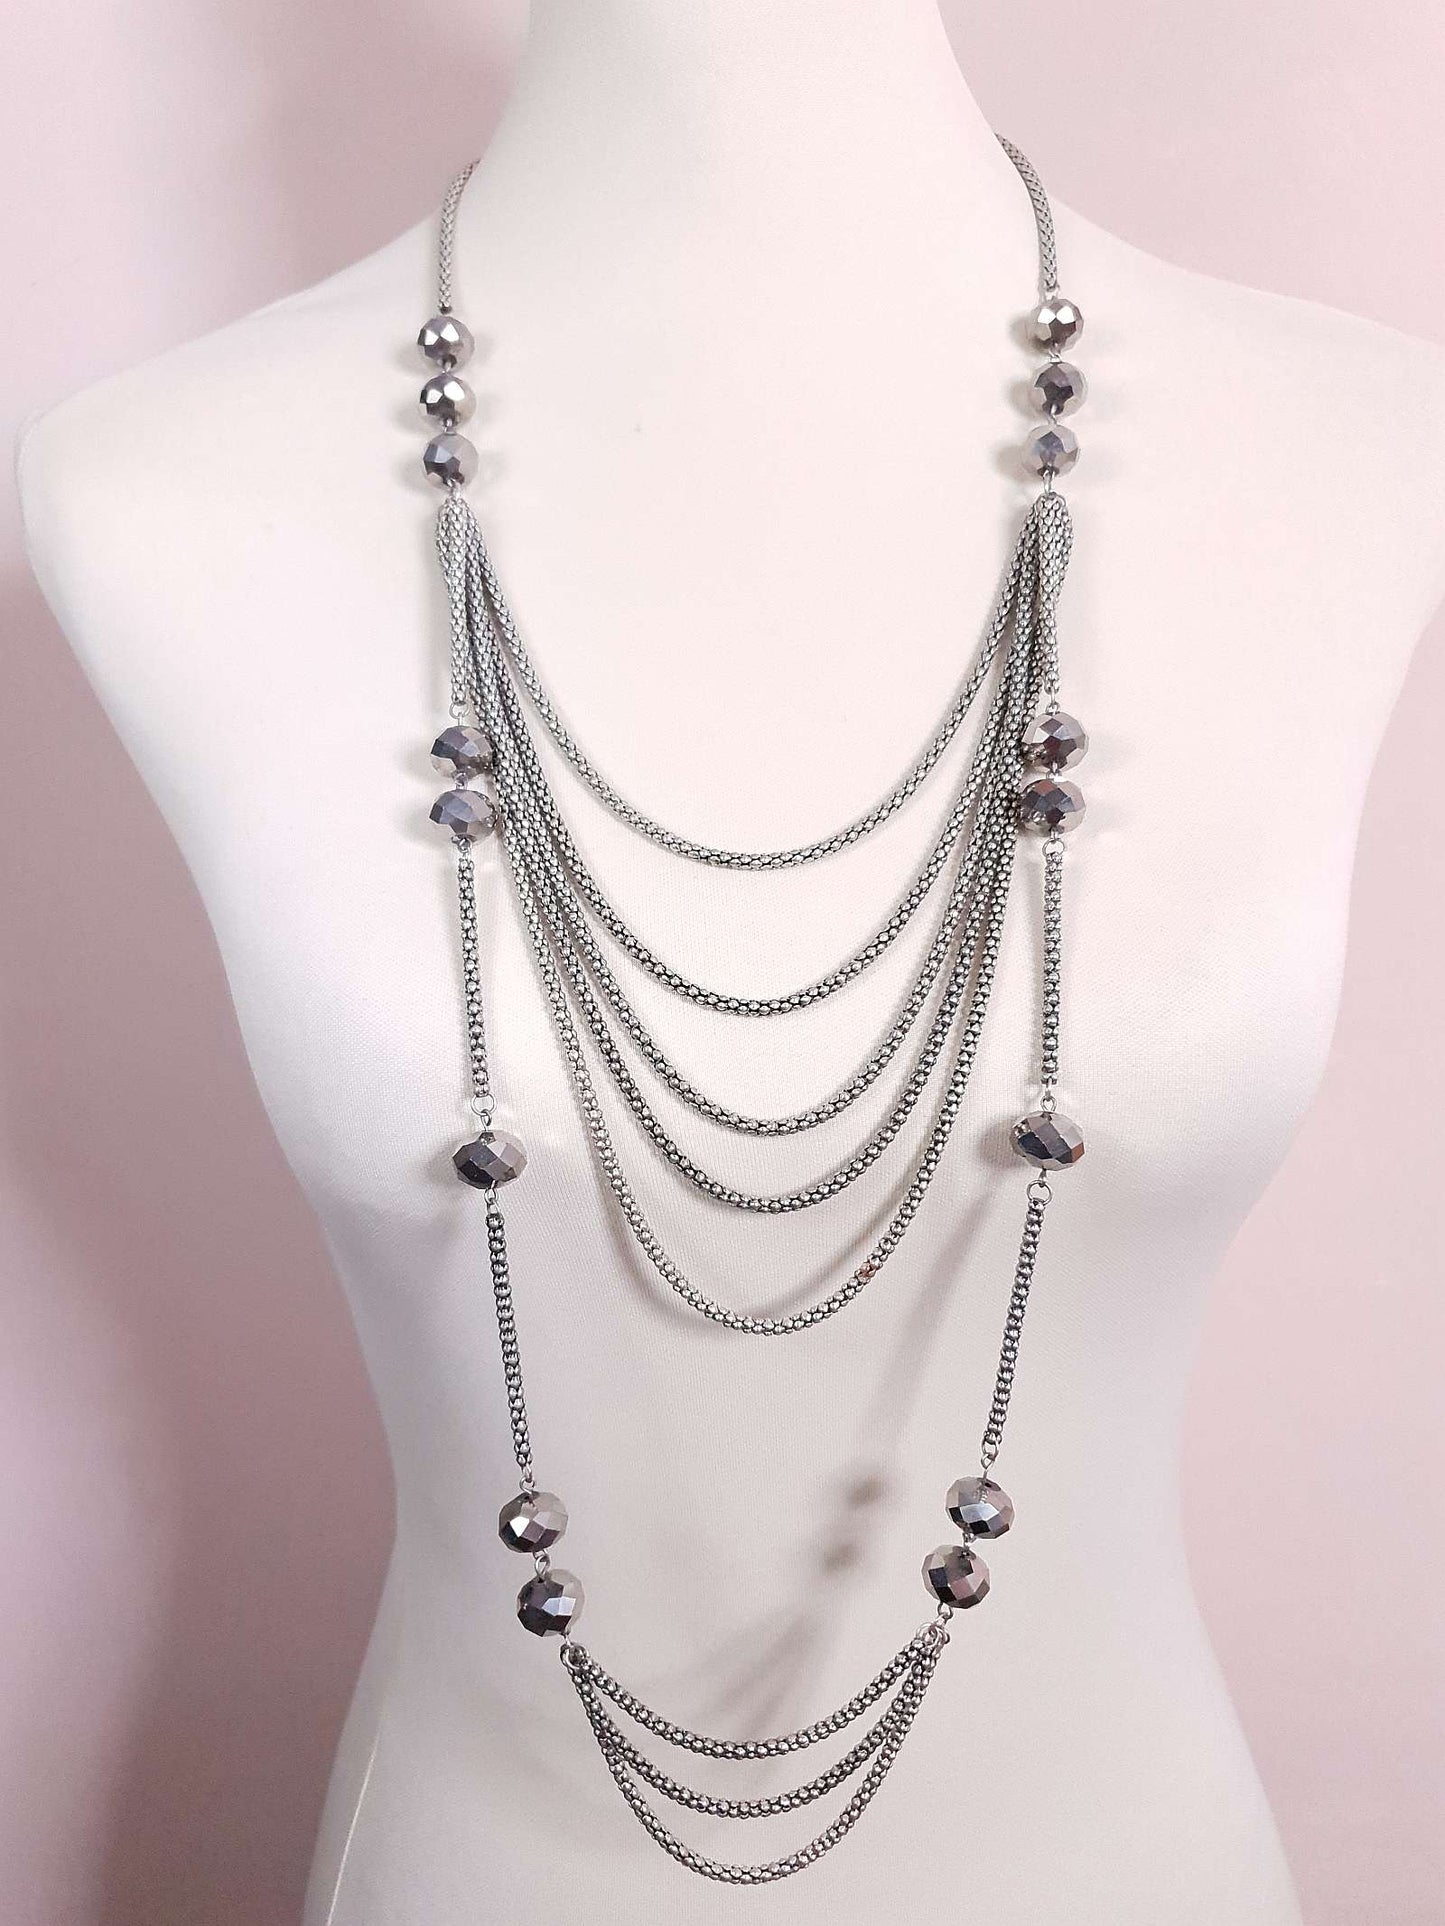 Vintage Long Layered Necklace 39" Draped 20s Style Faceted Bead Silver-Tone Multi-Tier